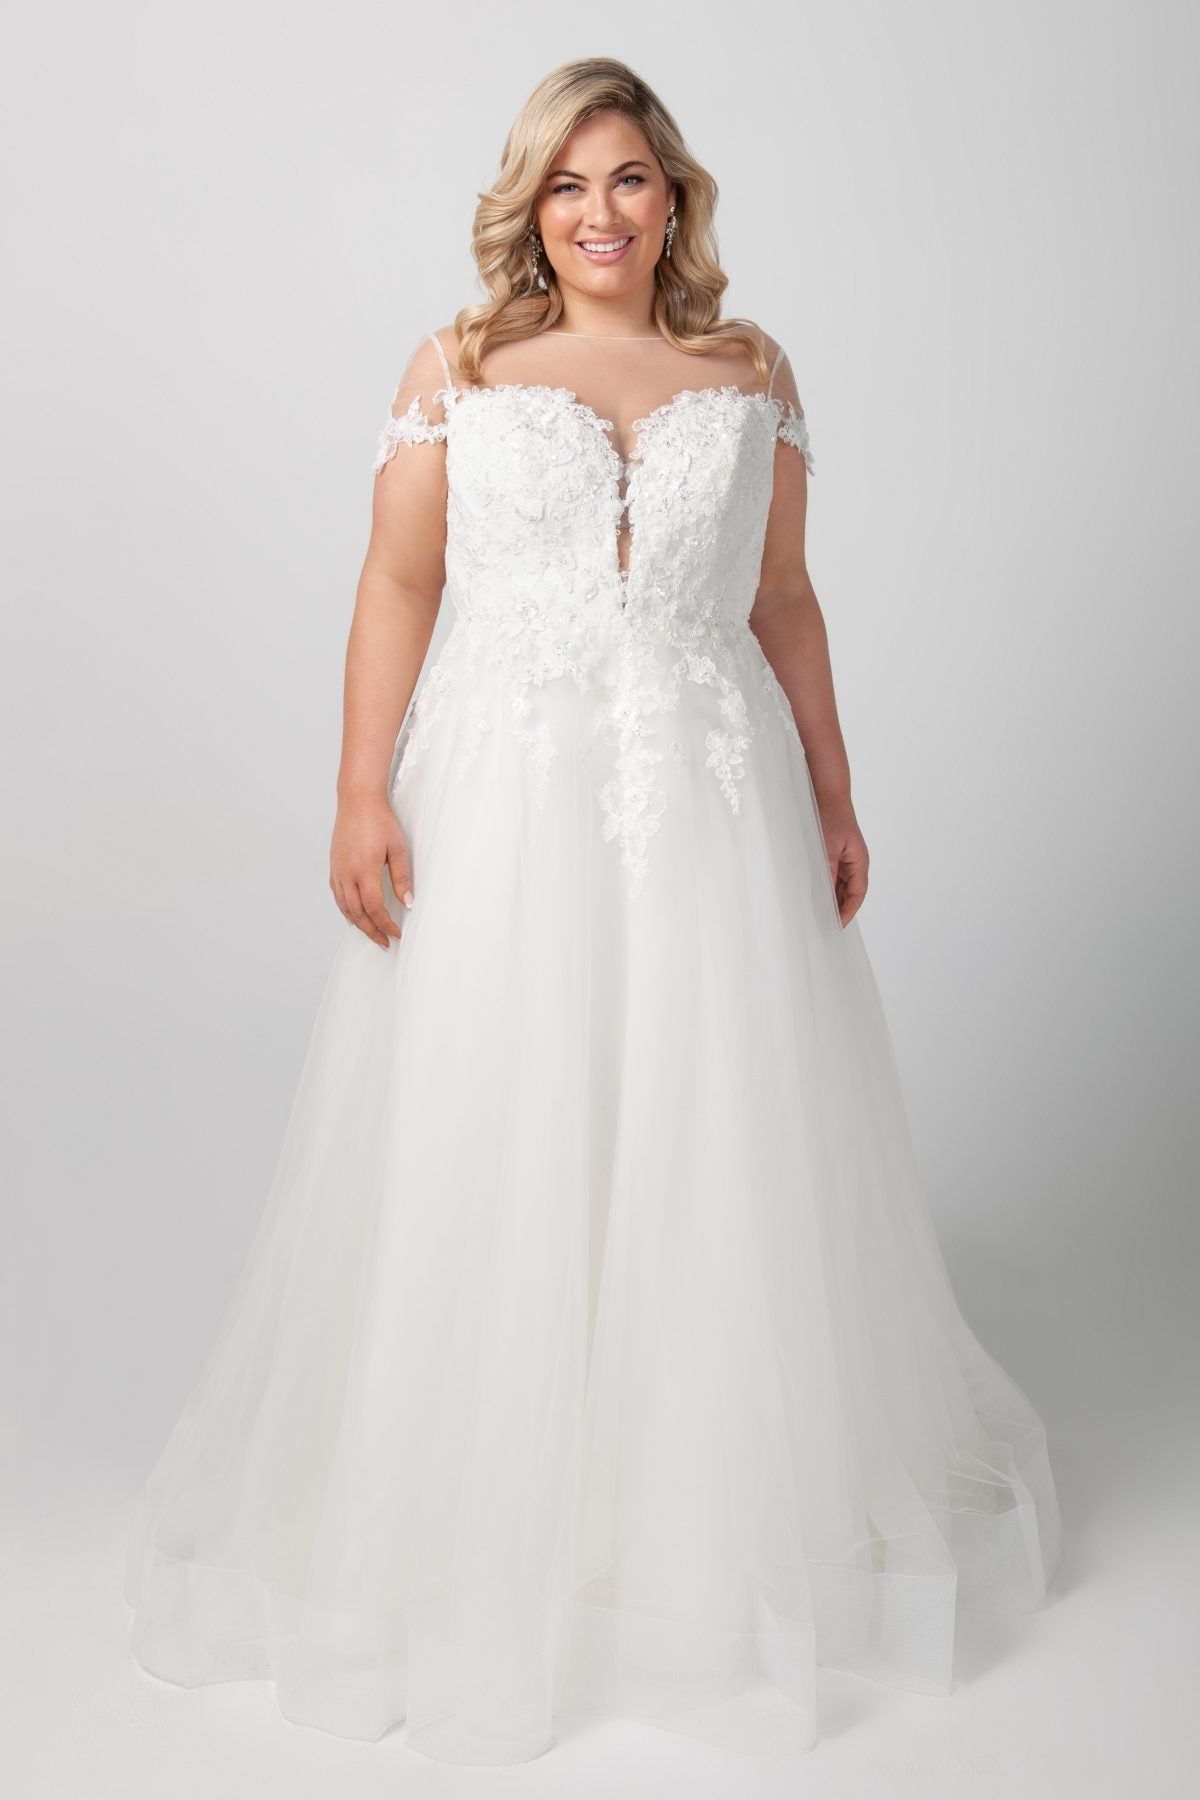 Short Sleeve Illusion Neckline Applique Bodice With Tulle